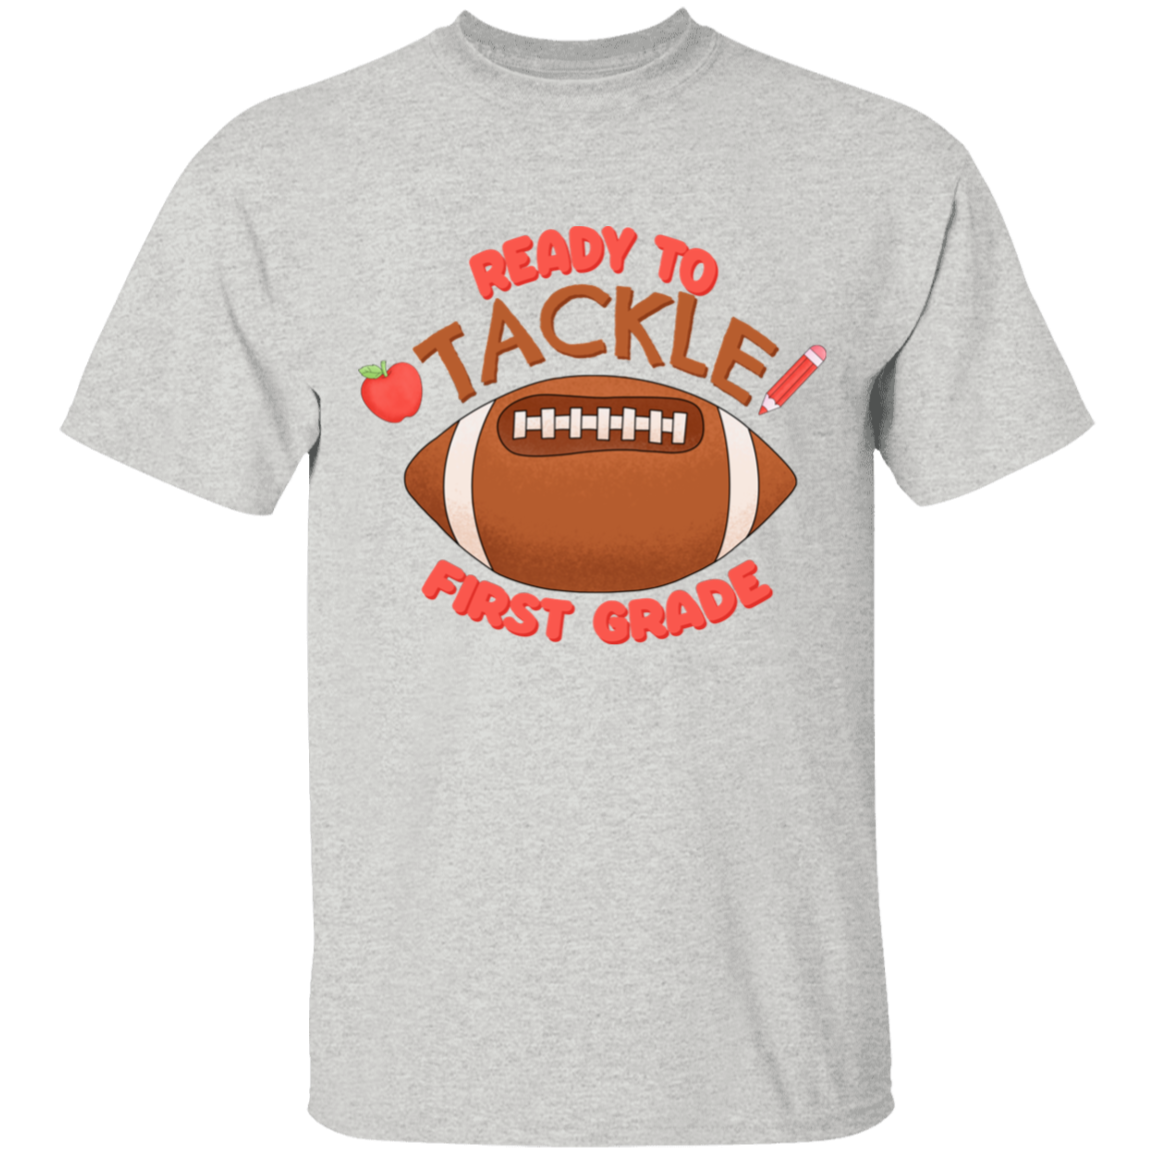 Ready to Tackle First Grade Youth Cotton T-Shirt